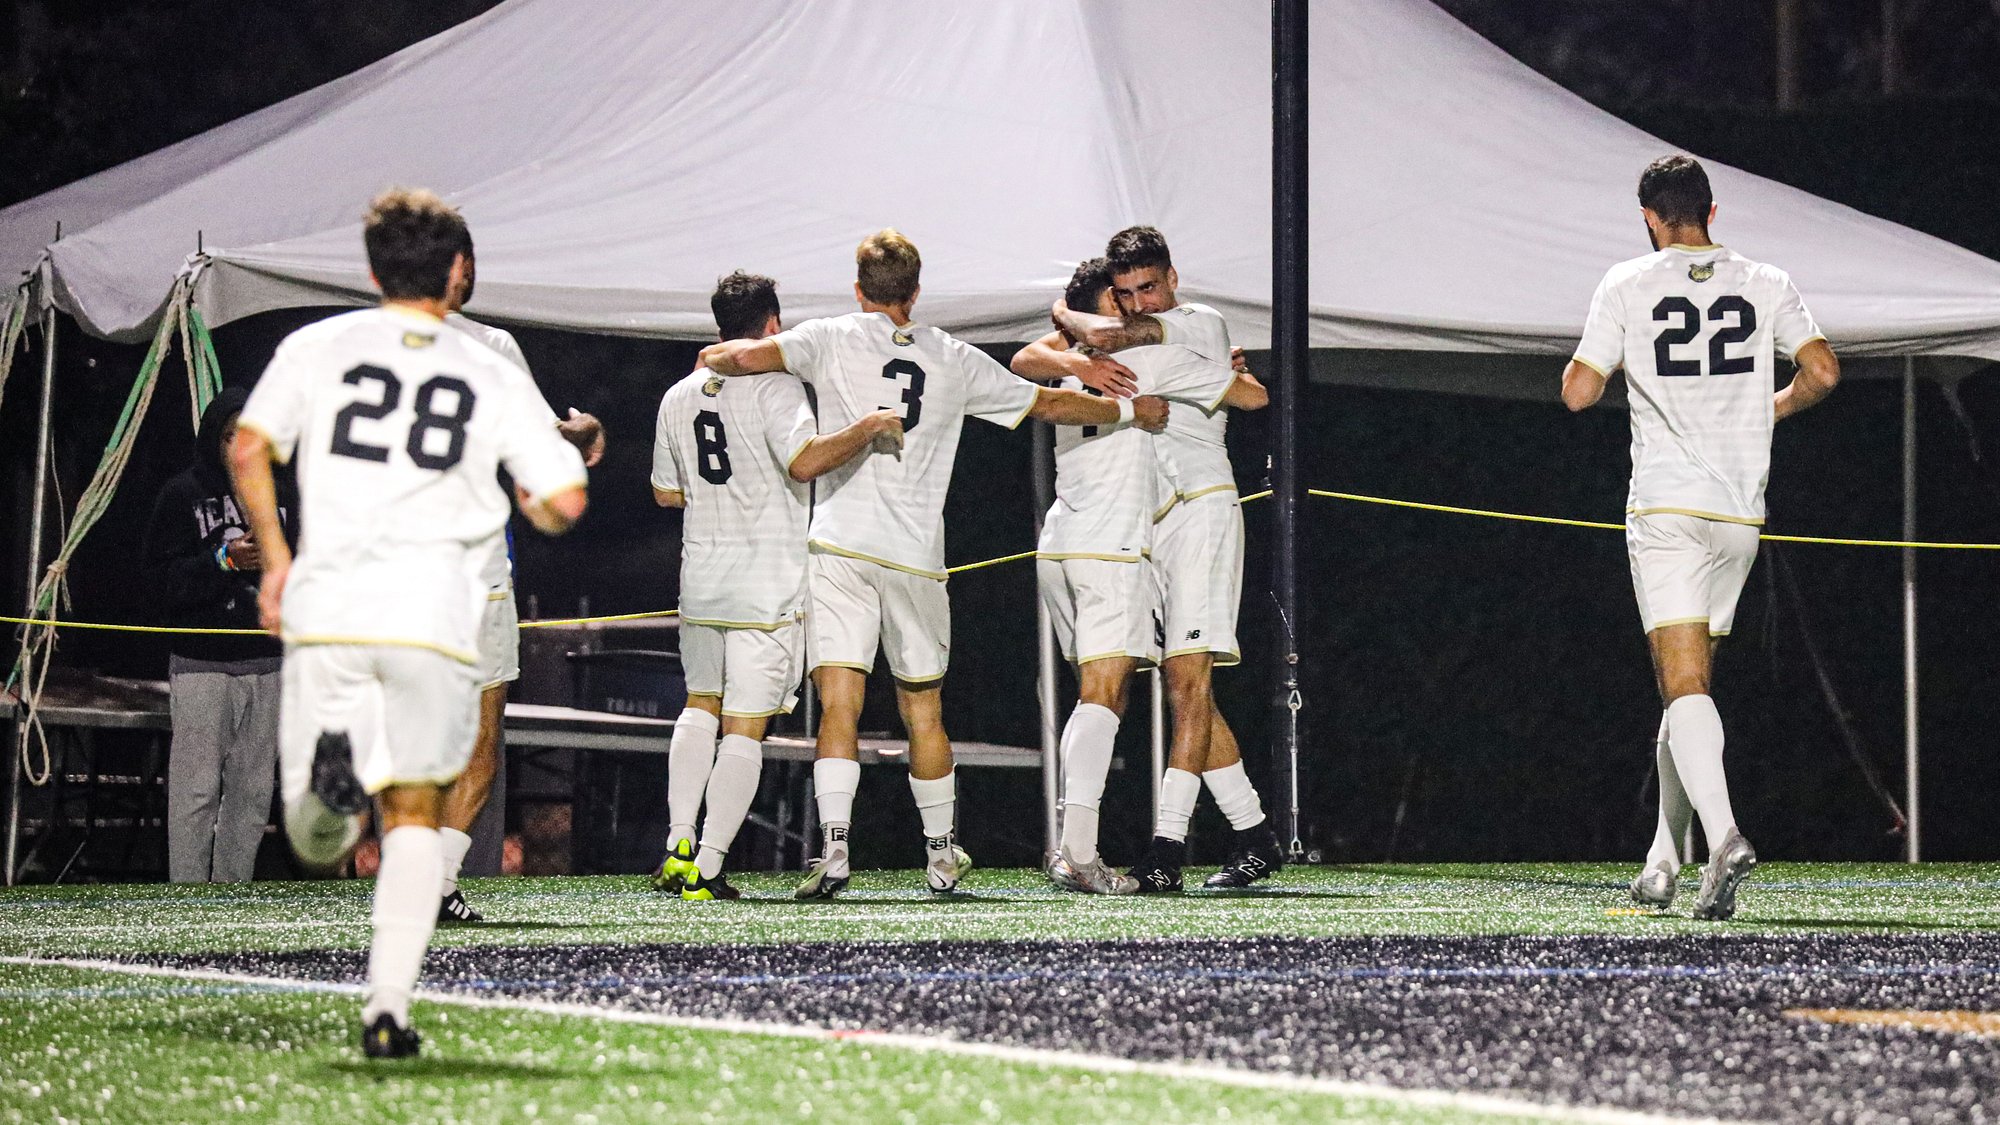 Dawgs earn first conference win in 5-0 over NJIT